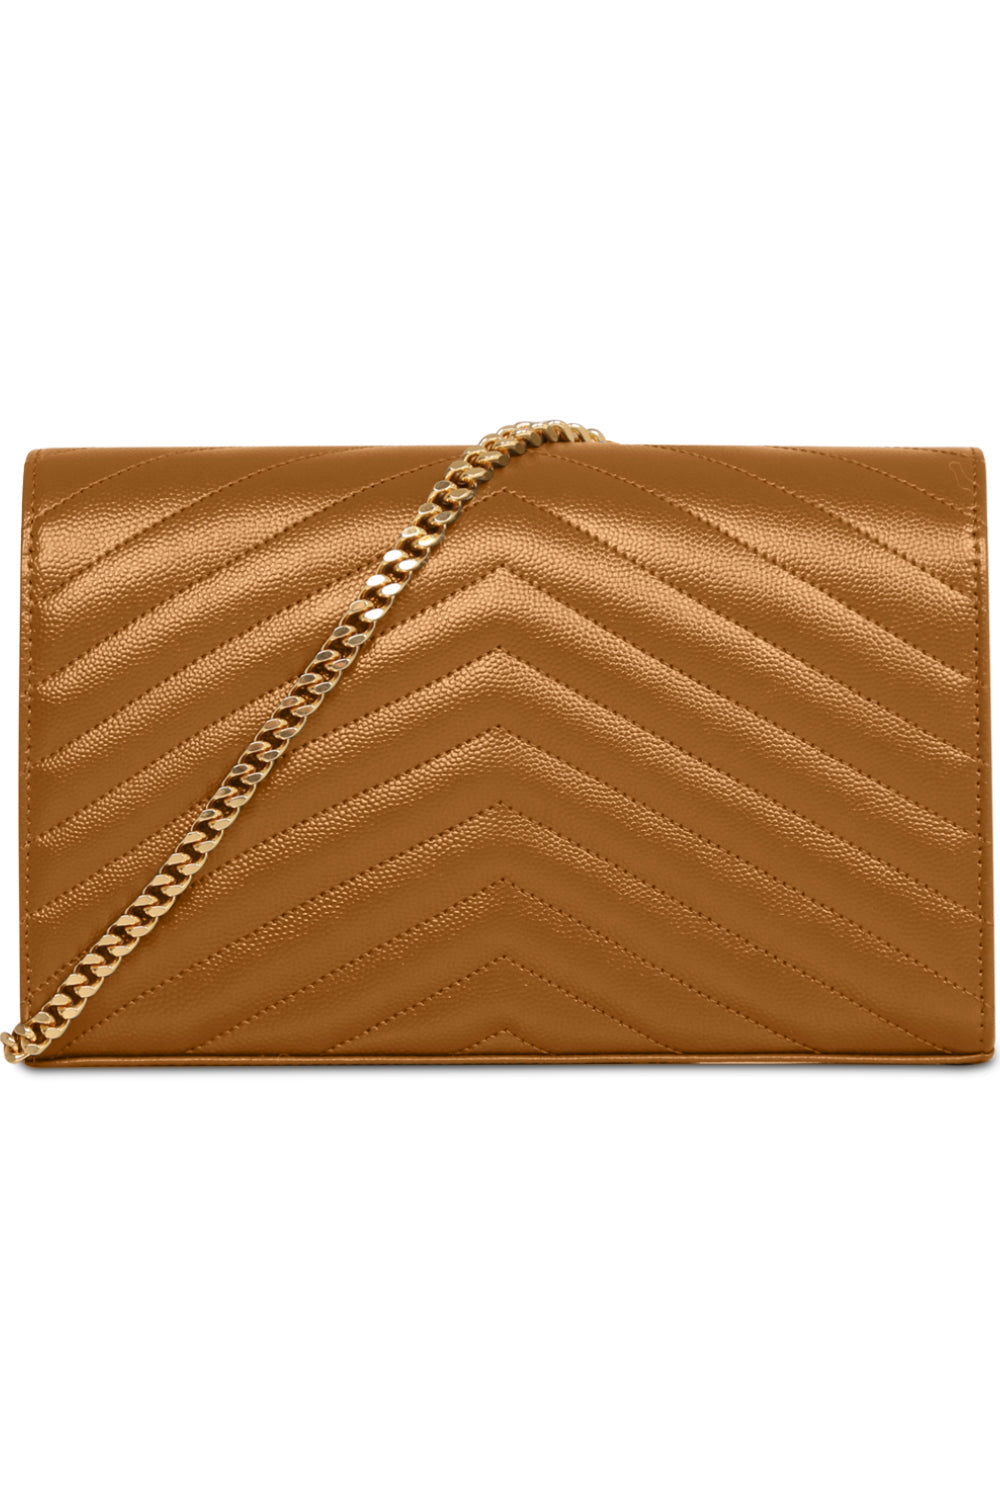 SAINT LAURENT BAGS BROWN MONOGRAMME QUILTED CHAIN WALLET | NATURAL DARK/GOLD